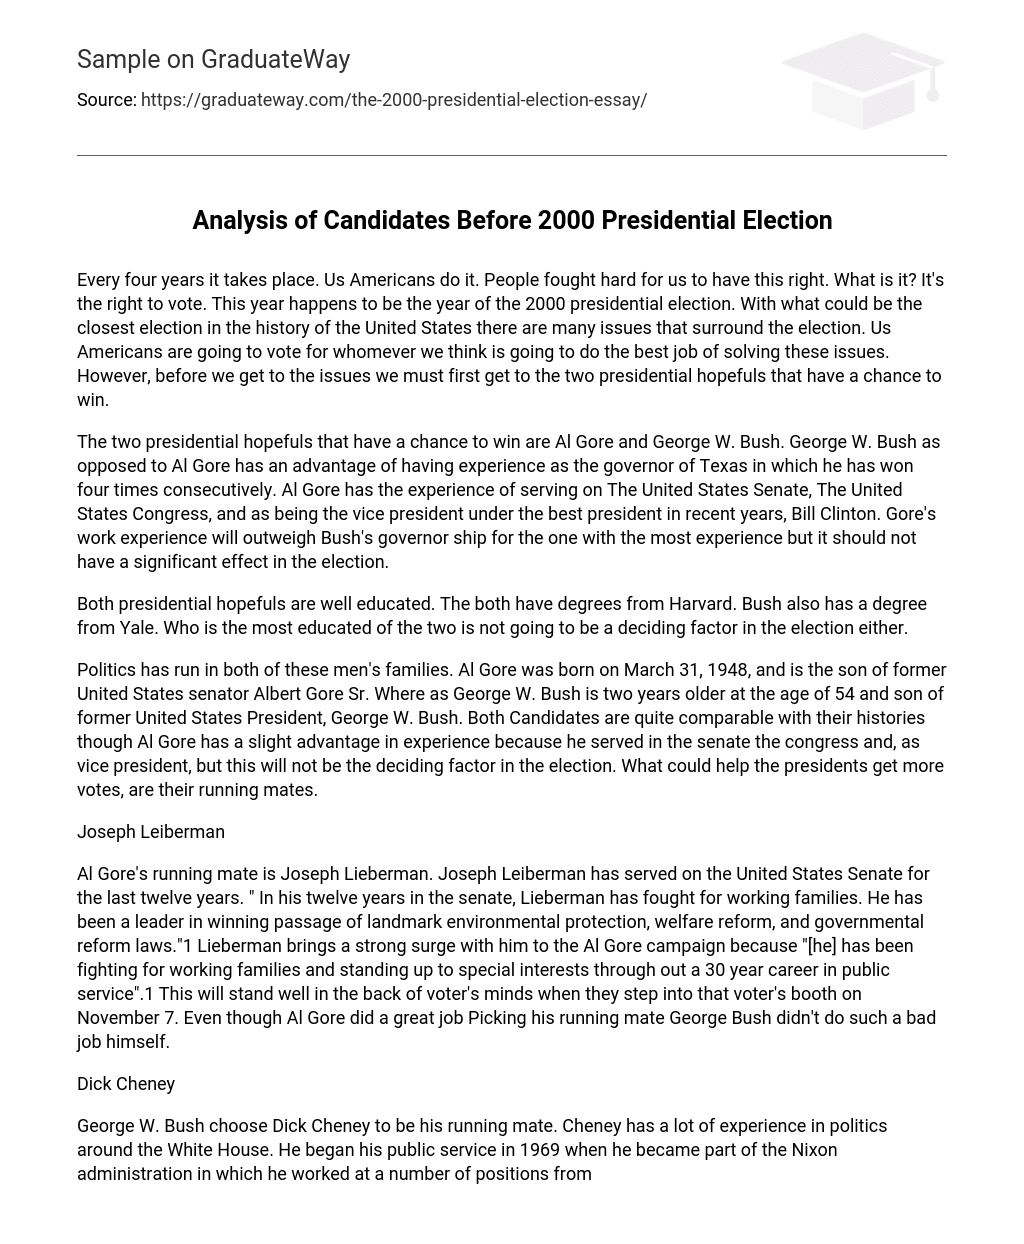 Analysis of Candidates Before 2000 Presidential Election